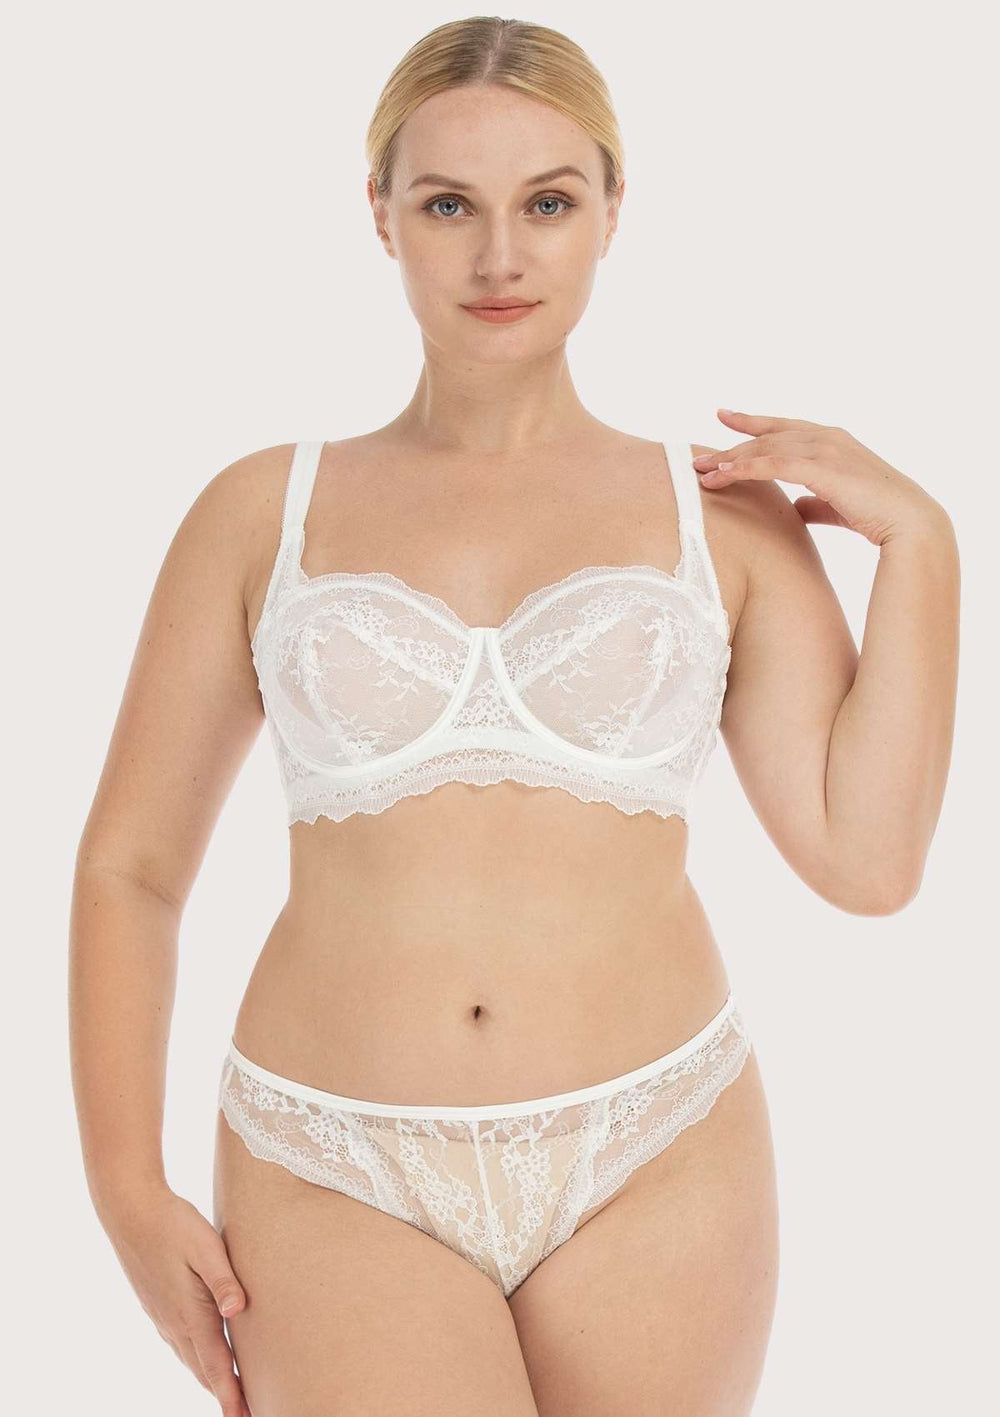 HSIA Floral Lace Unlined Bridal Balconette Bra Set - Supportive